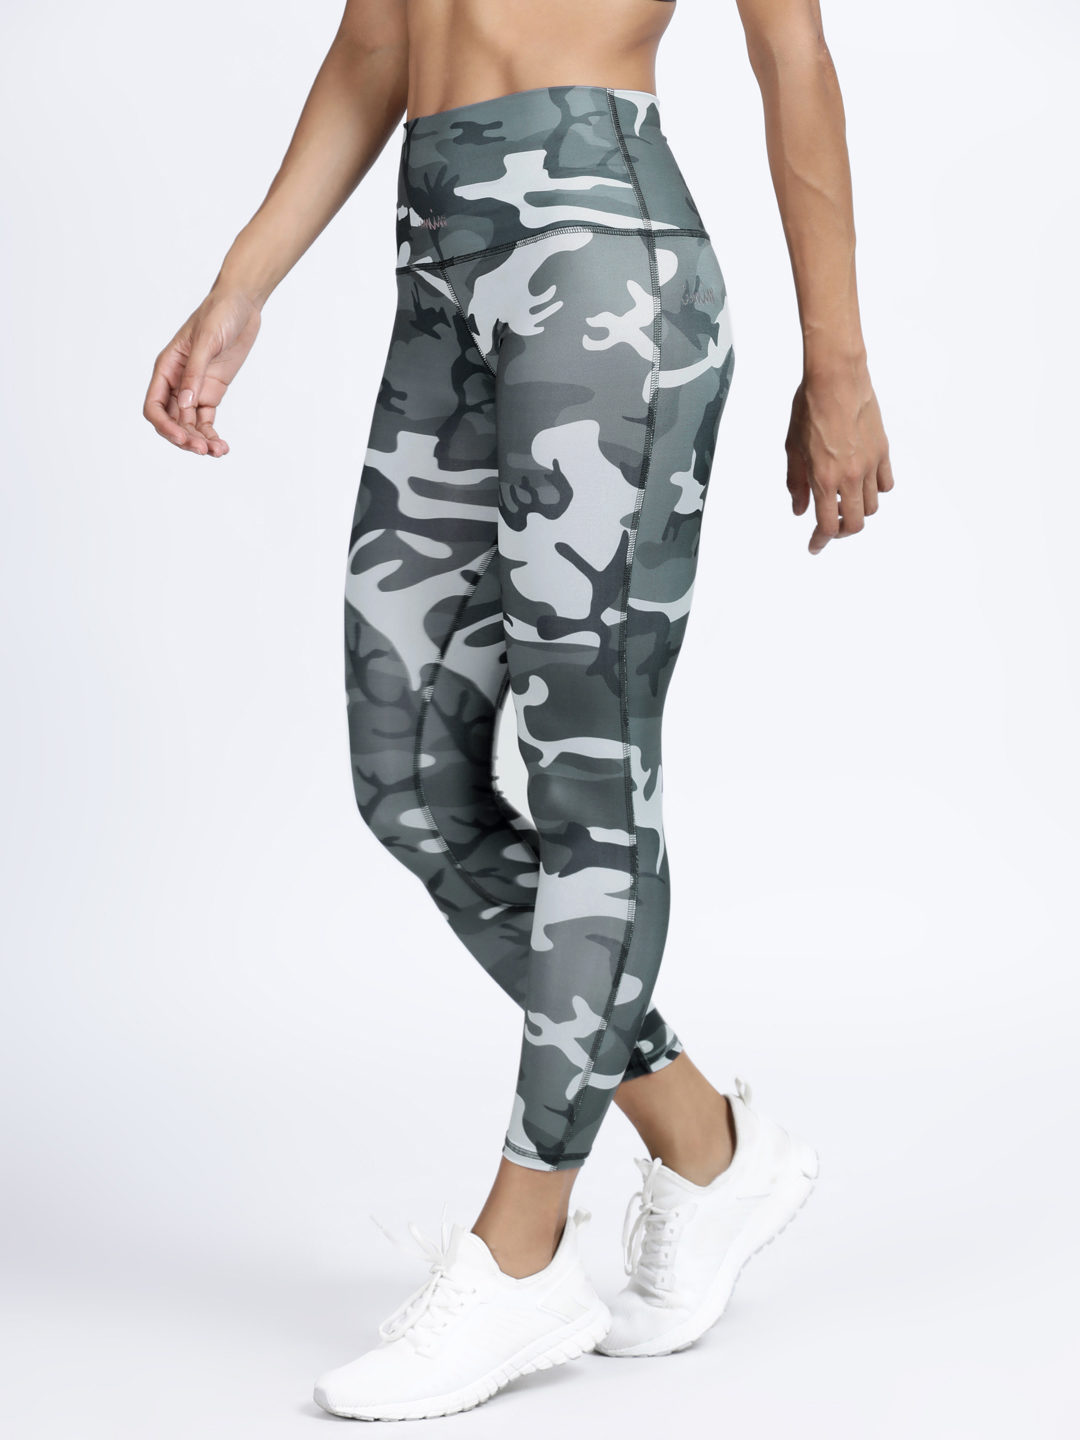 Camouflage Print 7/8th Length Leggings For Women – MICHELLE SALINS